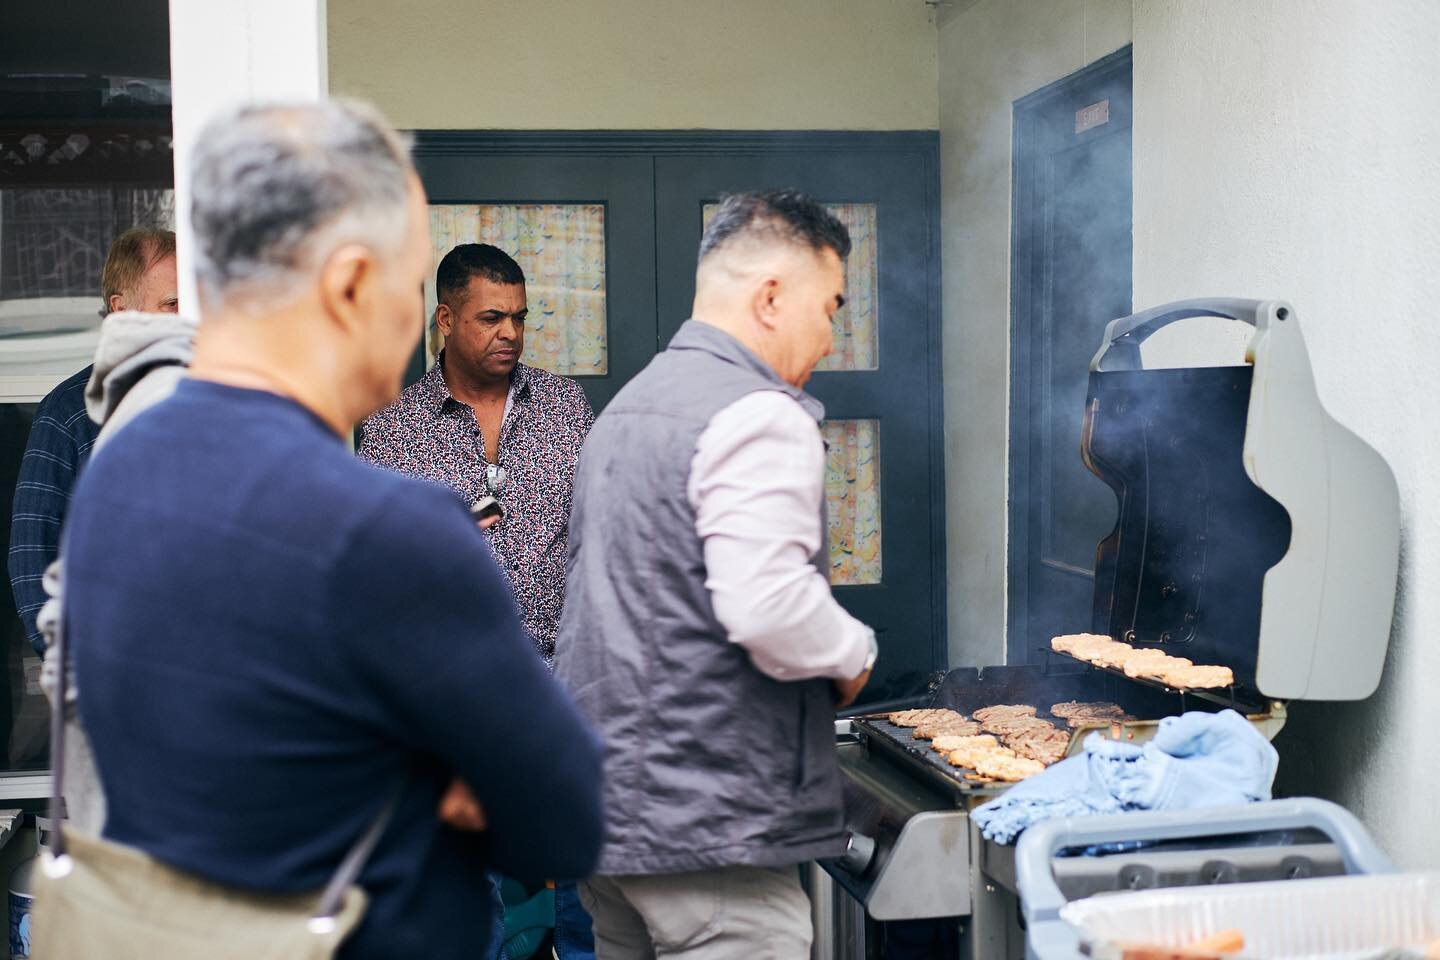 Looking for Sunday afternoon plans? Join us this Sunday after service for a BBQ in the courtyard @bravechurchsf. From burgers to community, you are not going to want to make other plans. See you there!